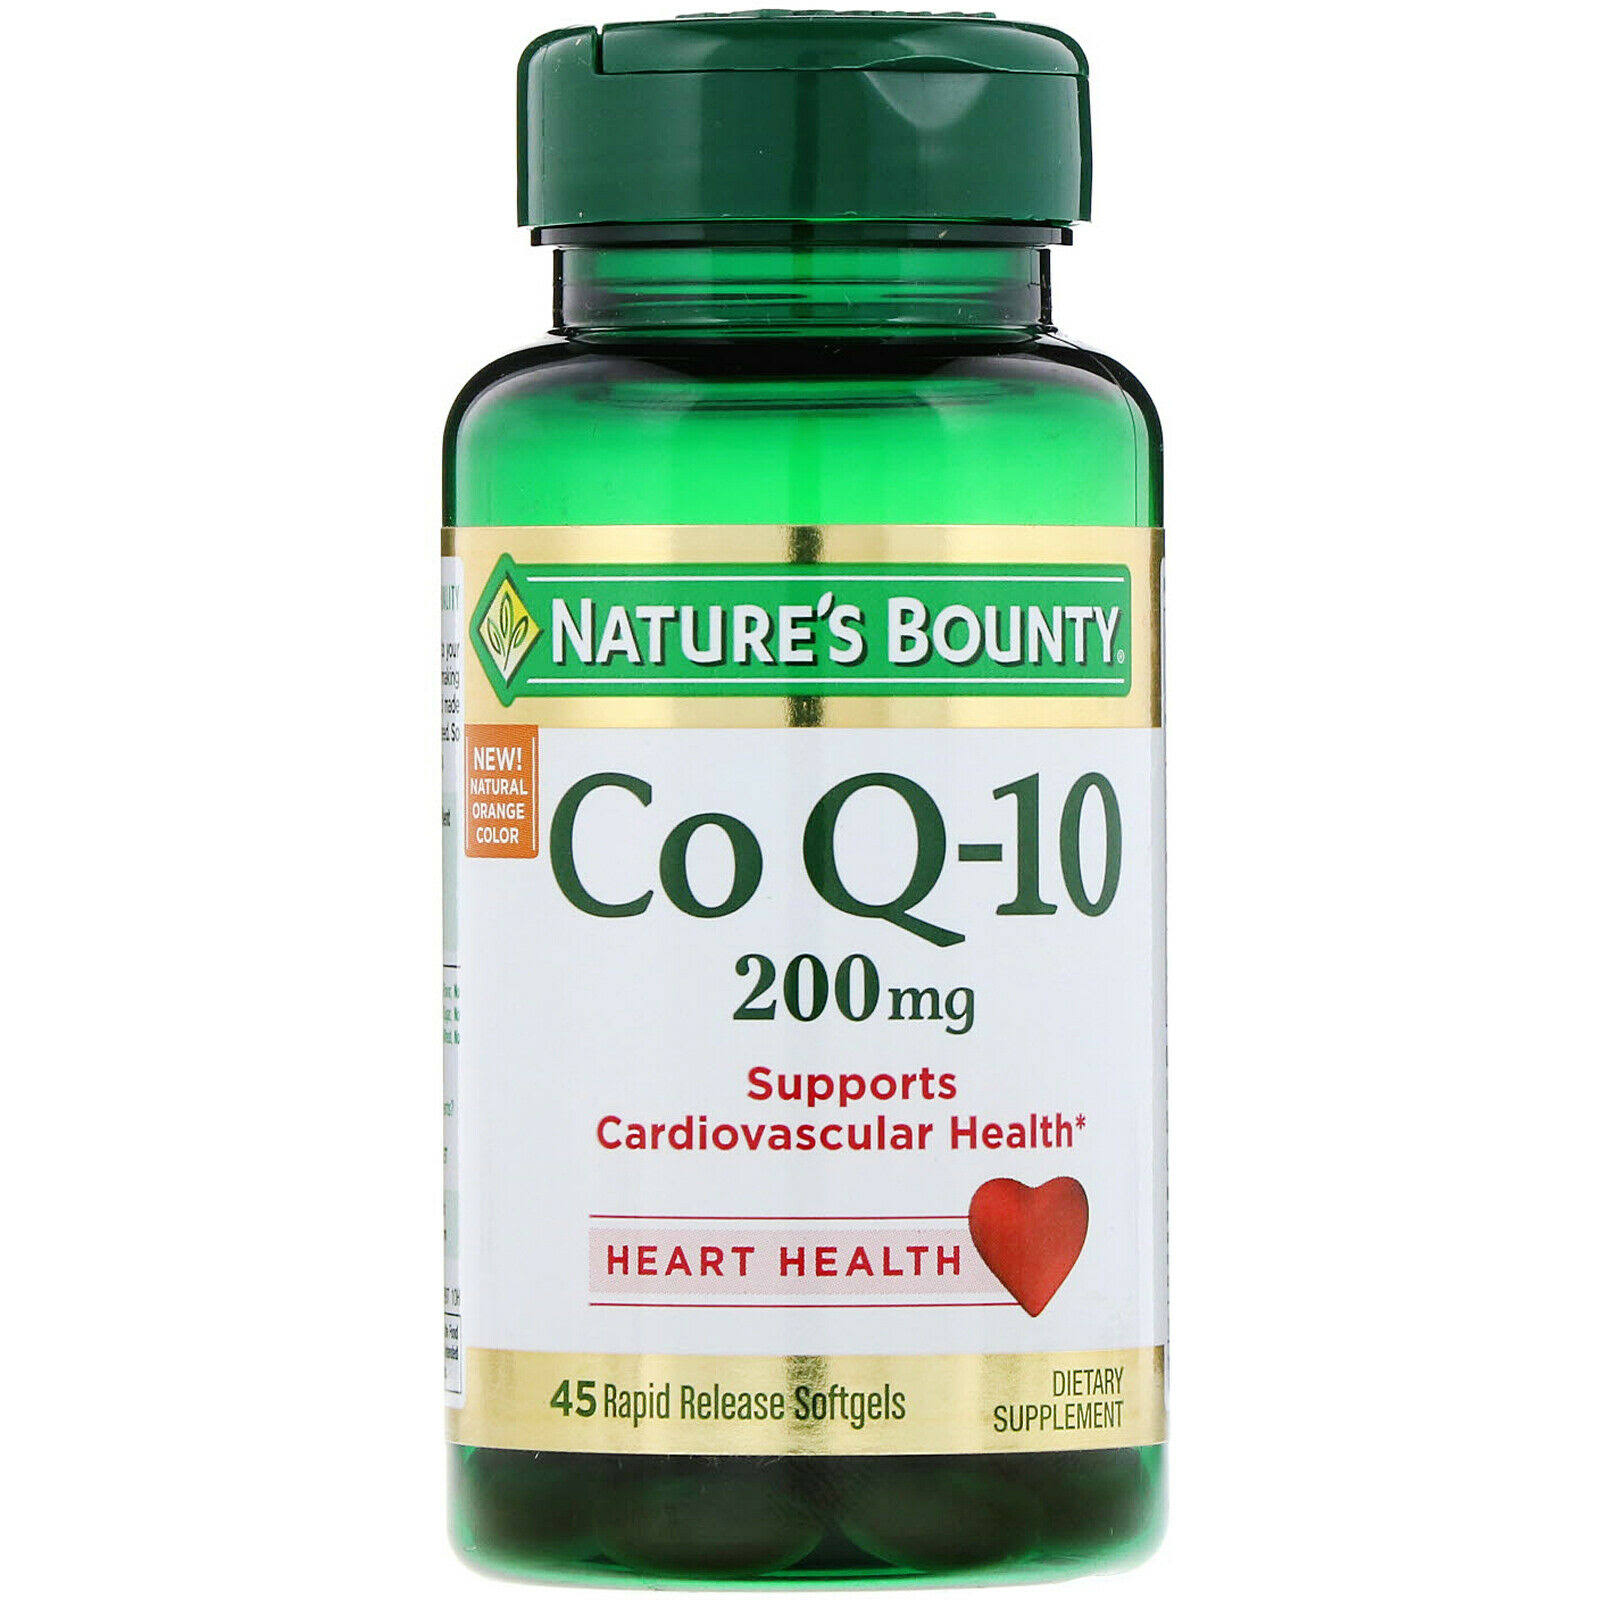 Nature's Bounty Co Q-10 Dietary Supplement - 45ct